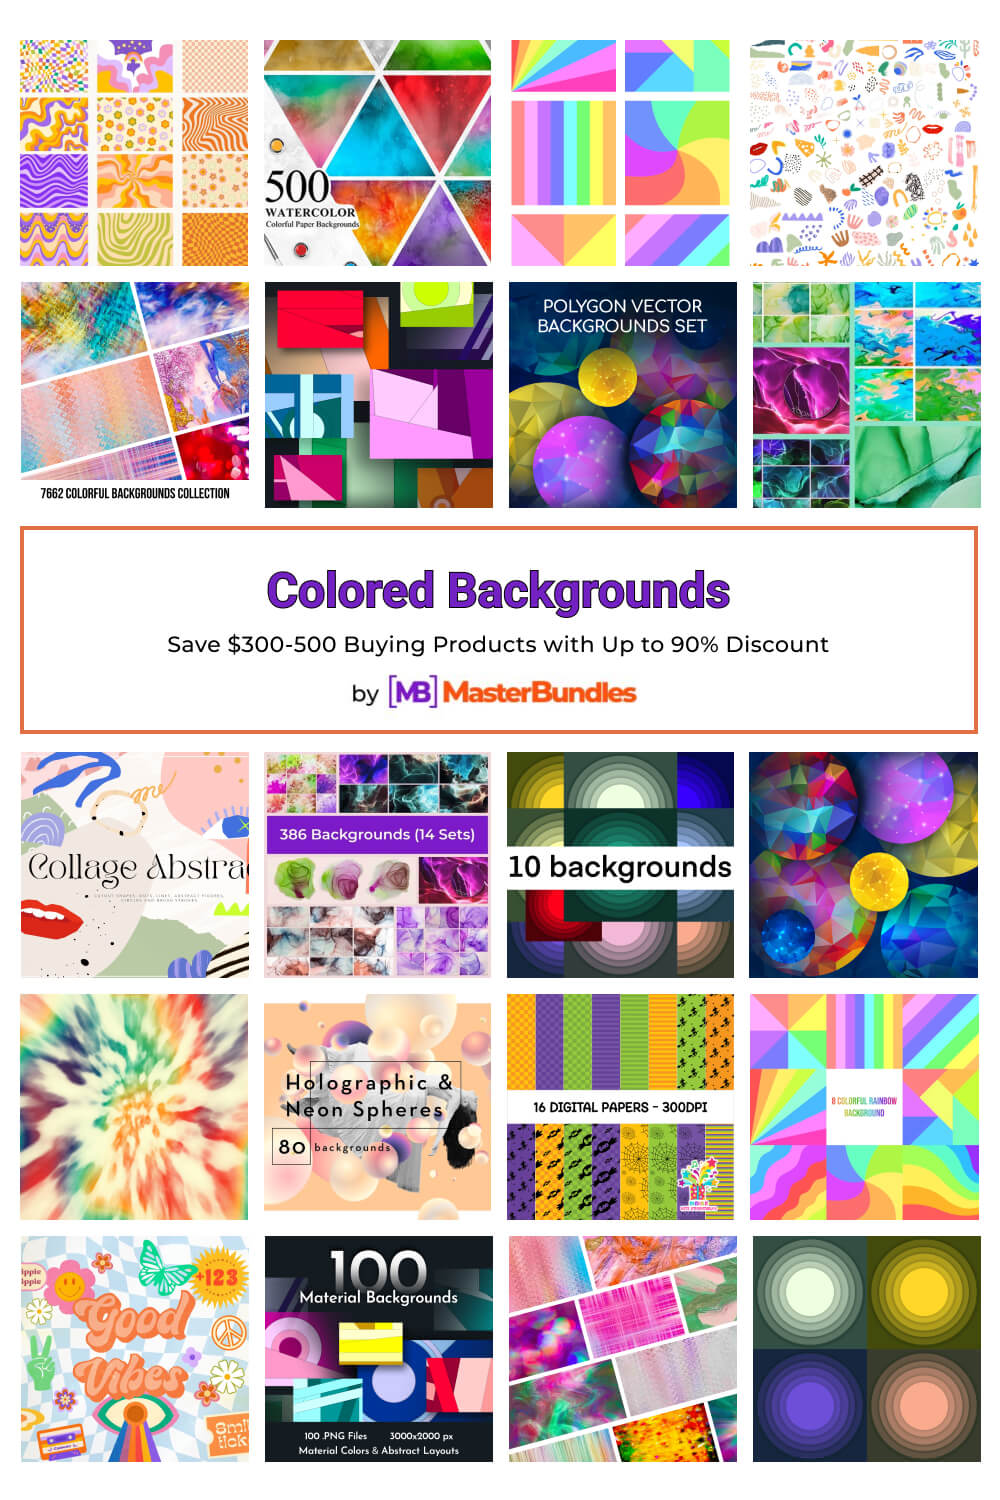 colored backgrounds pinterest image.